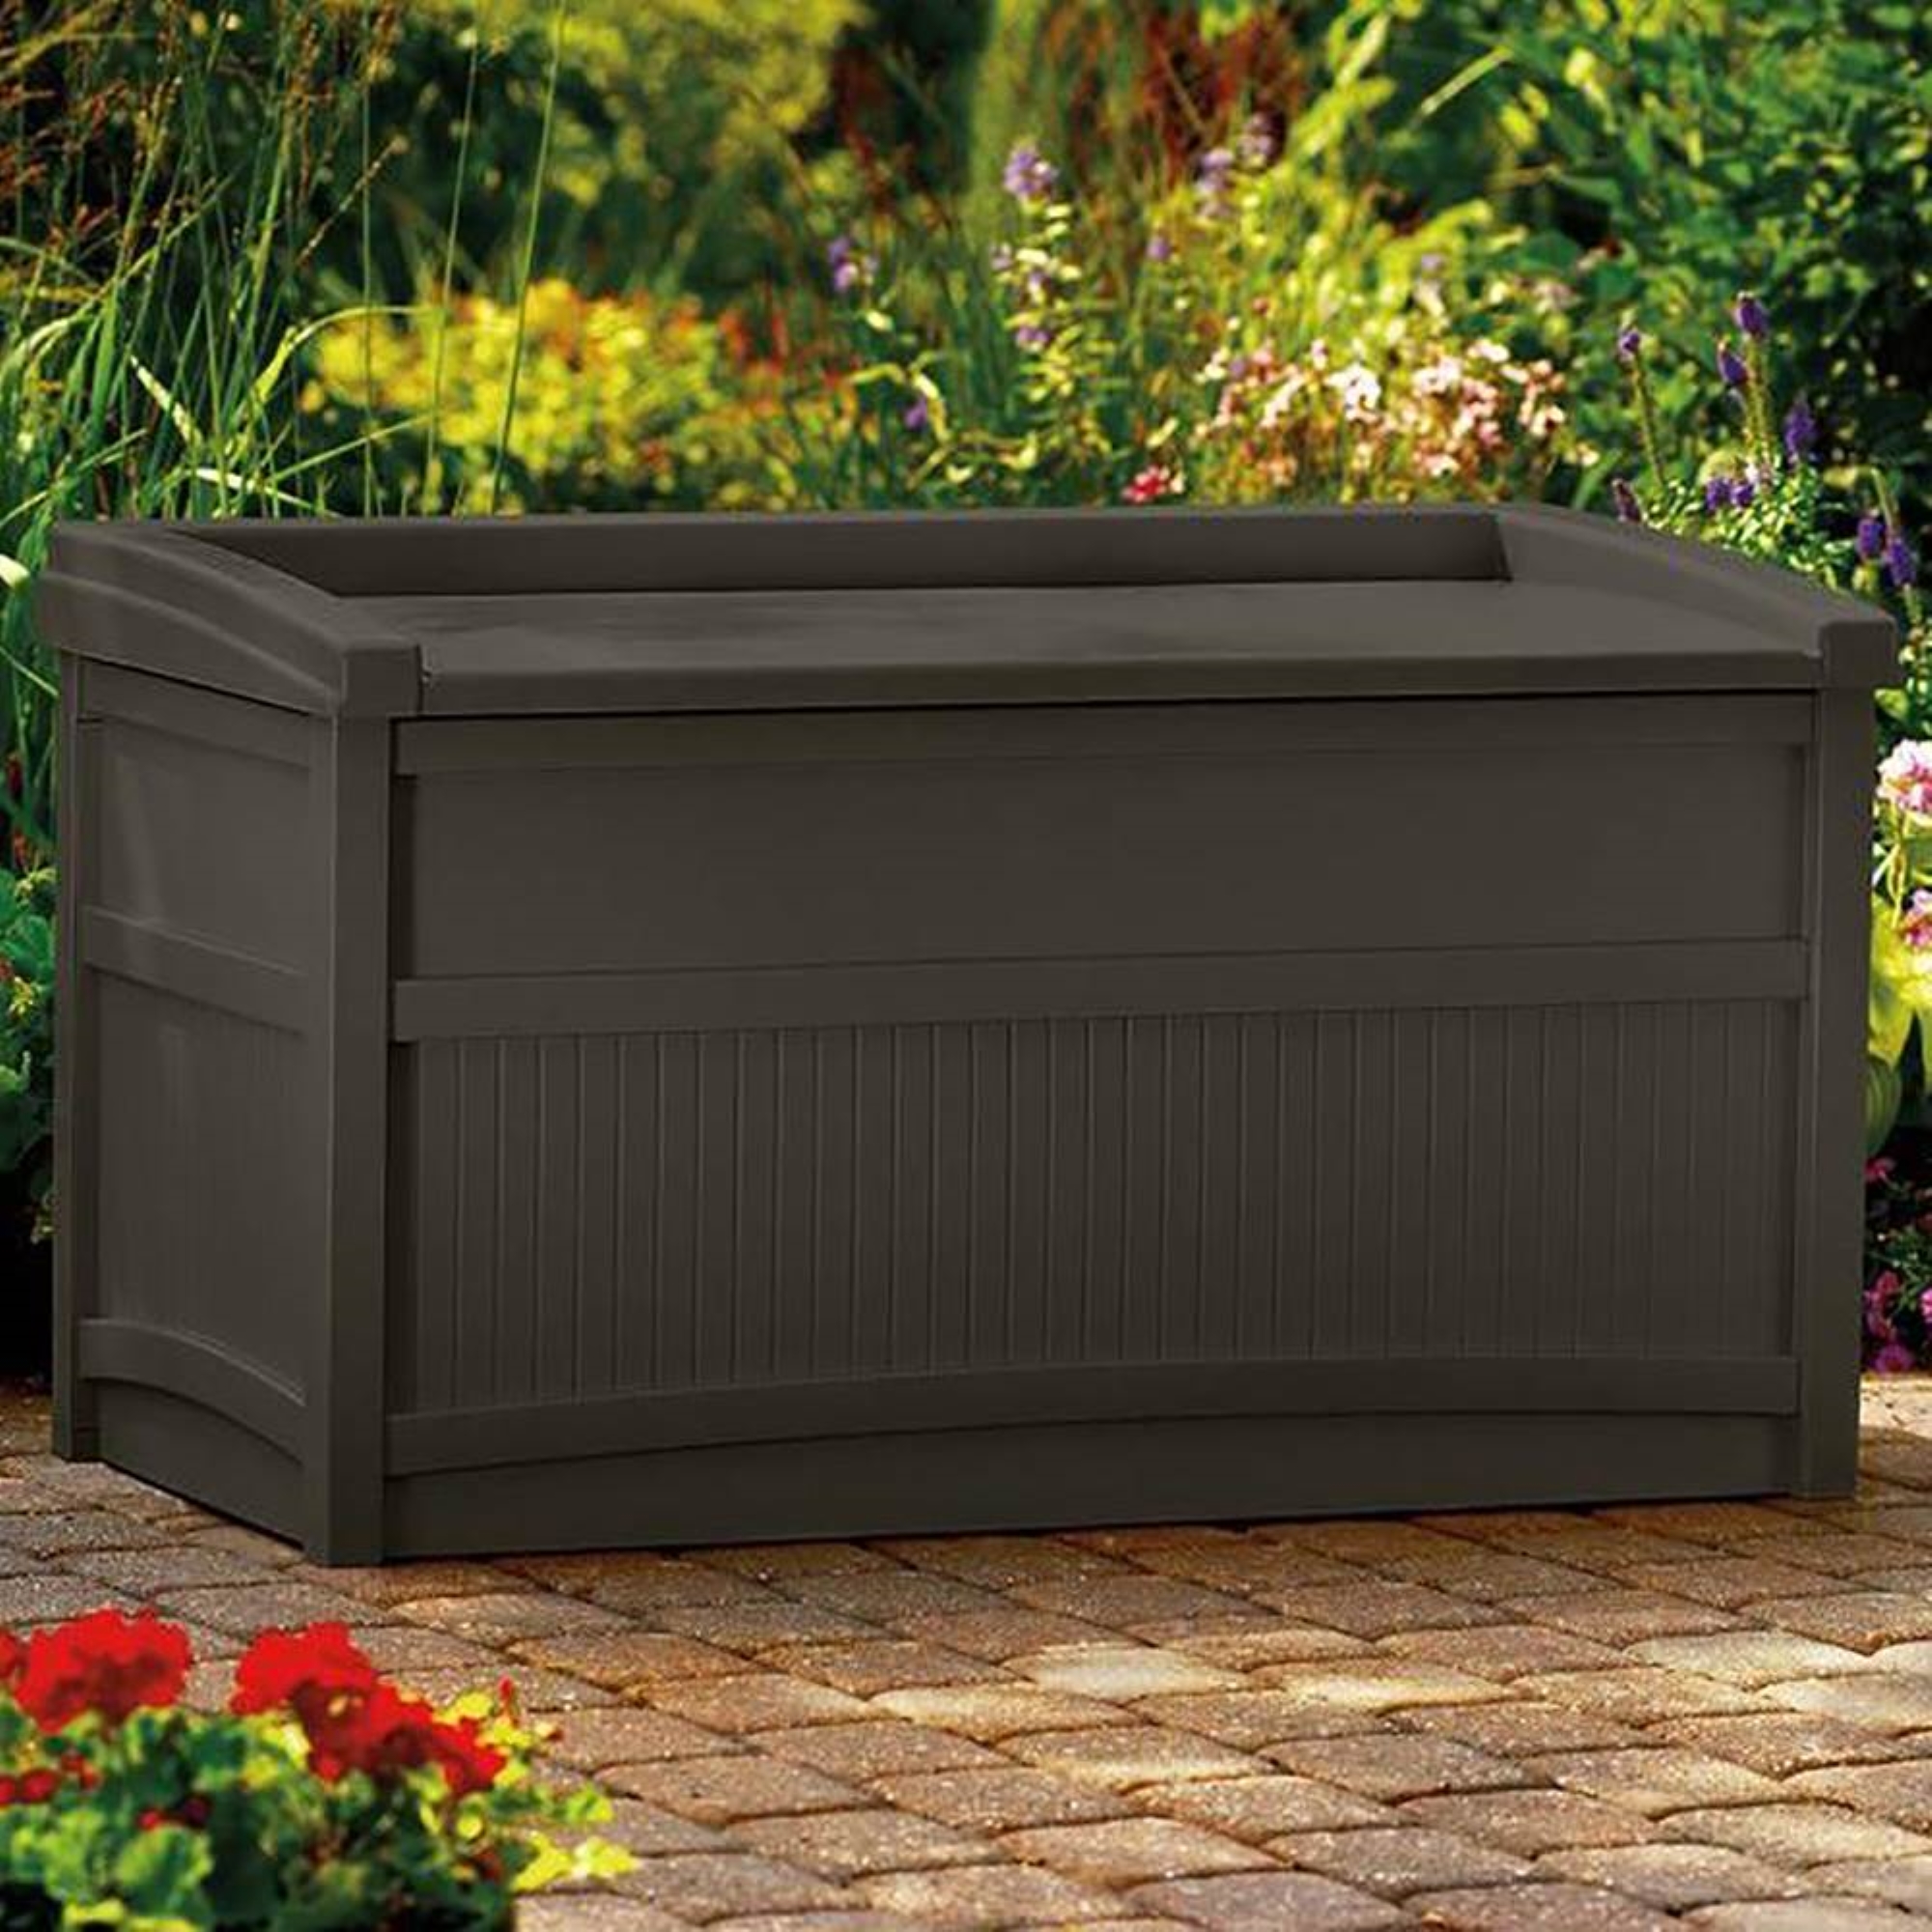 Suncast Db5500j 50 Gallon Outdoor Patio Resin Storage Chest Box With